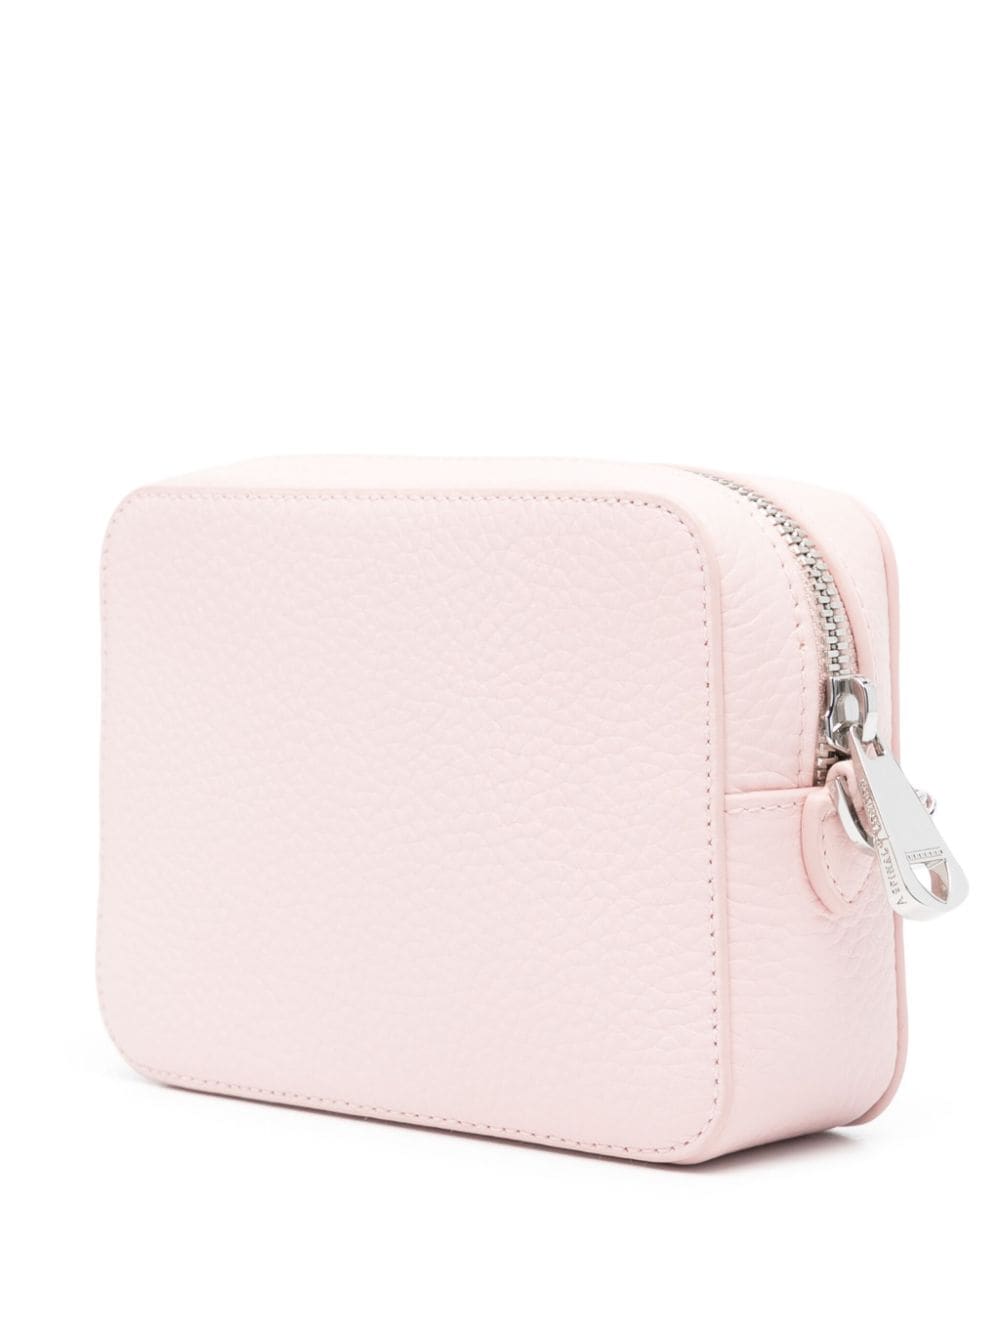 Aspinal Of London Milly cross body bag - Roze